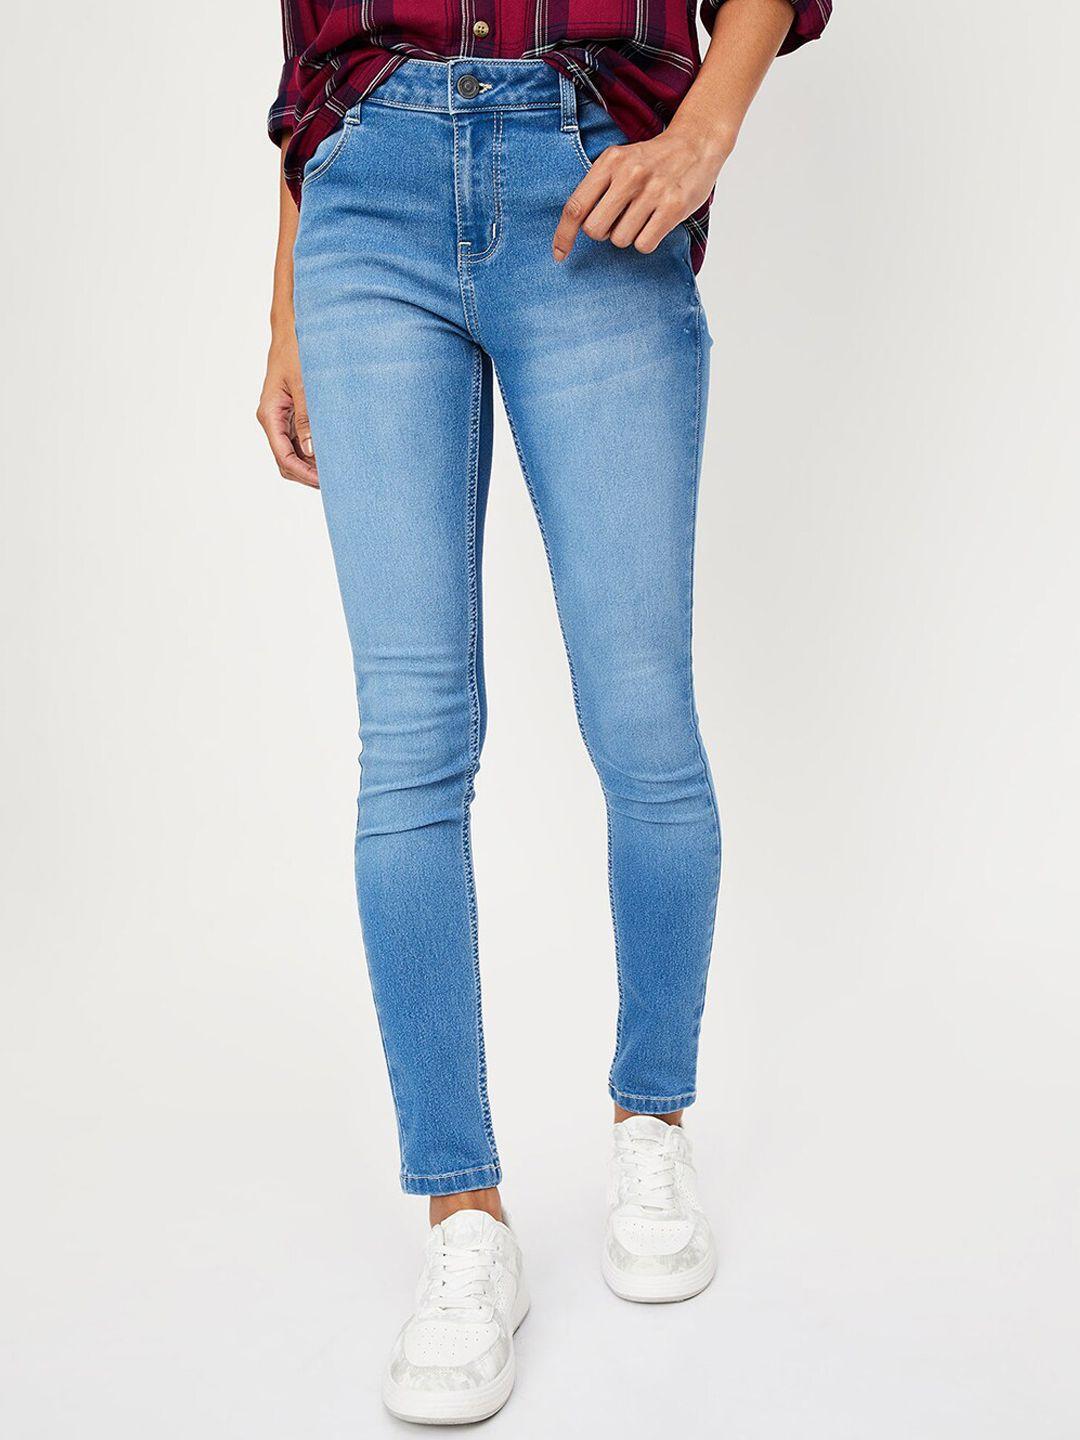 max women heavy fade stretchable jeans